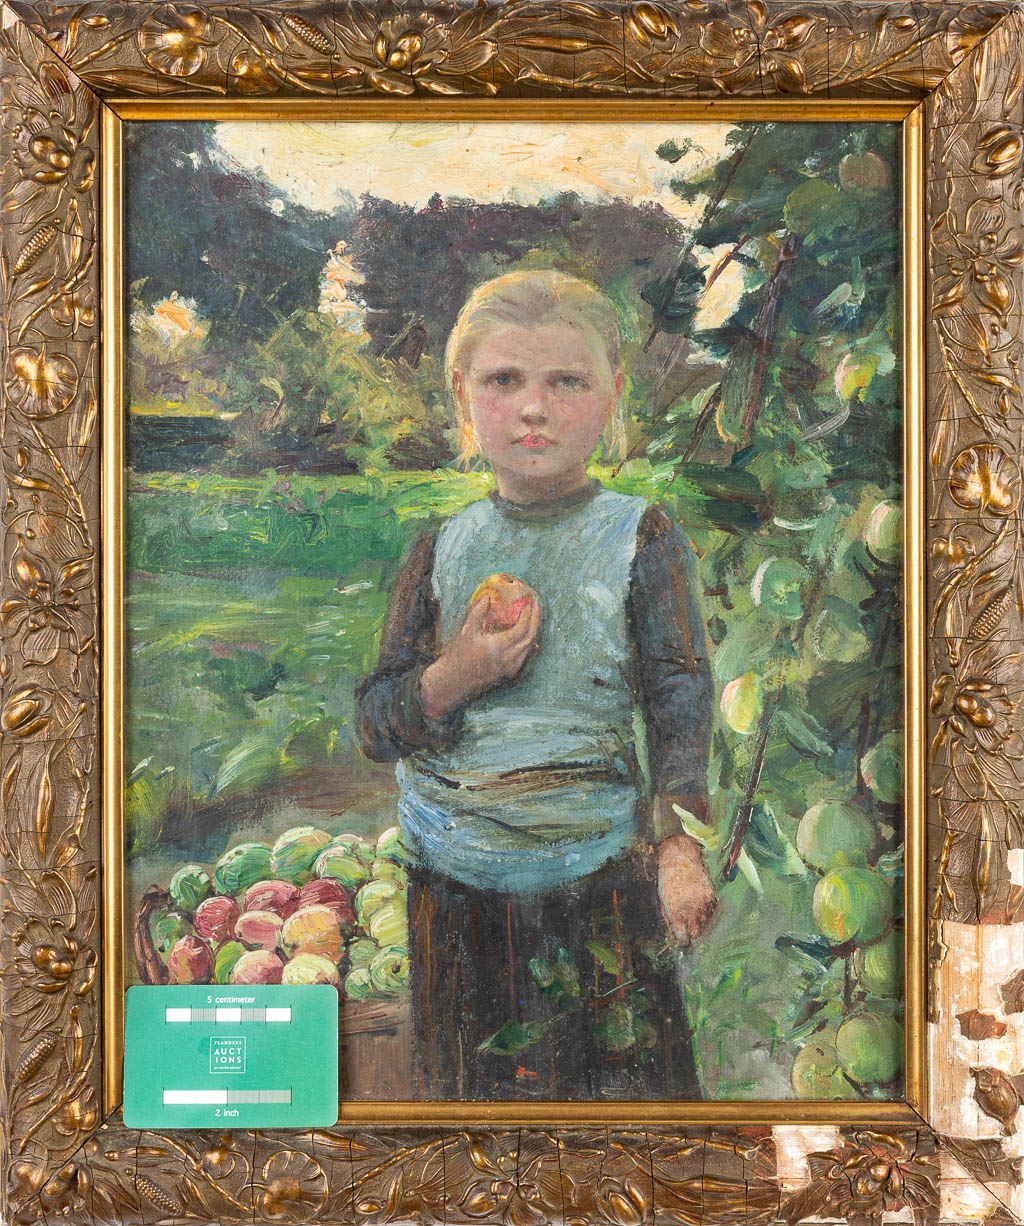 Georges VAN DEN BOS (1853-1911) 'Girl' a painting of a young girl with an apple, oil on panel. (33 x 41 cm)